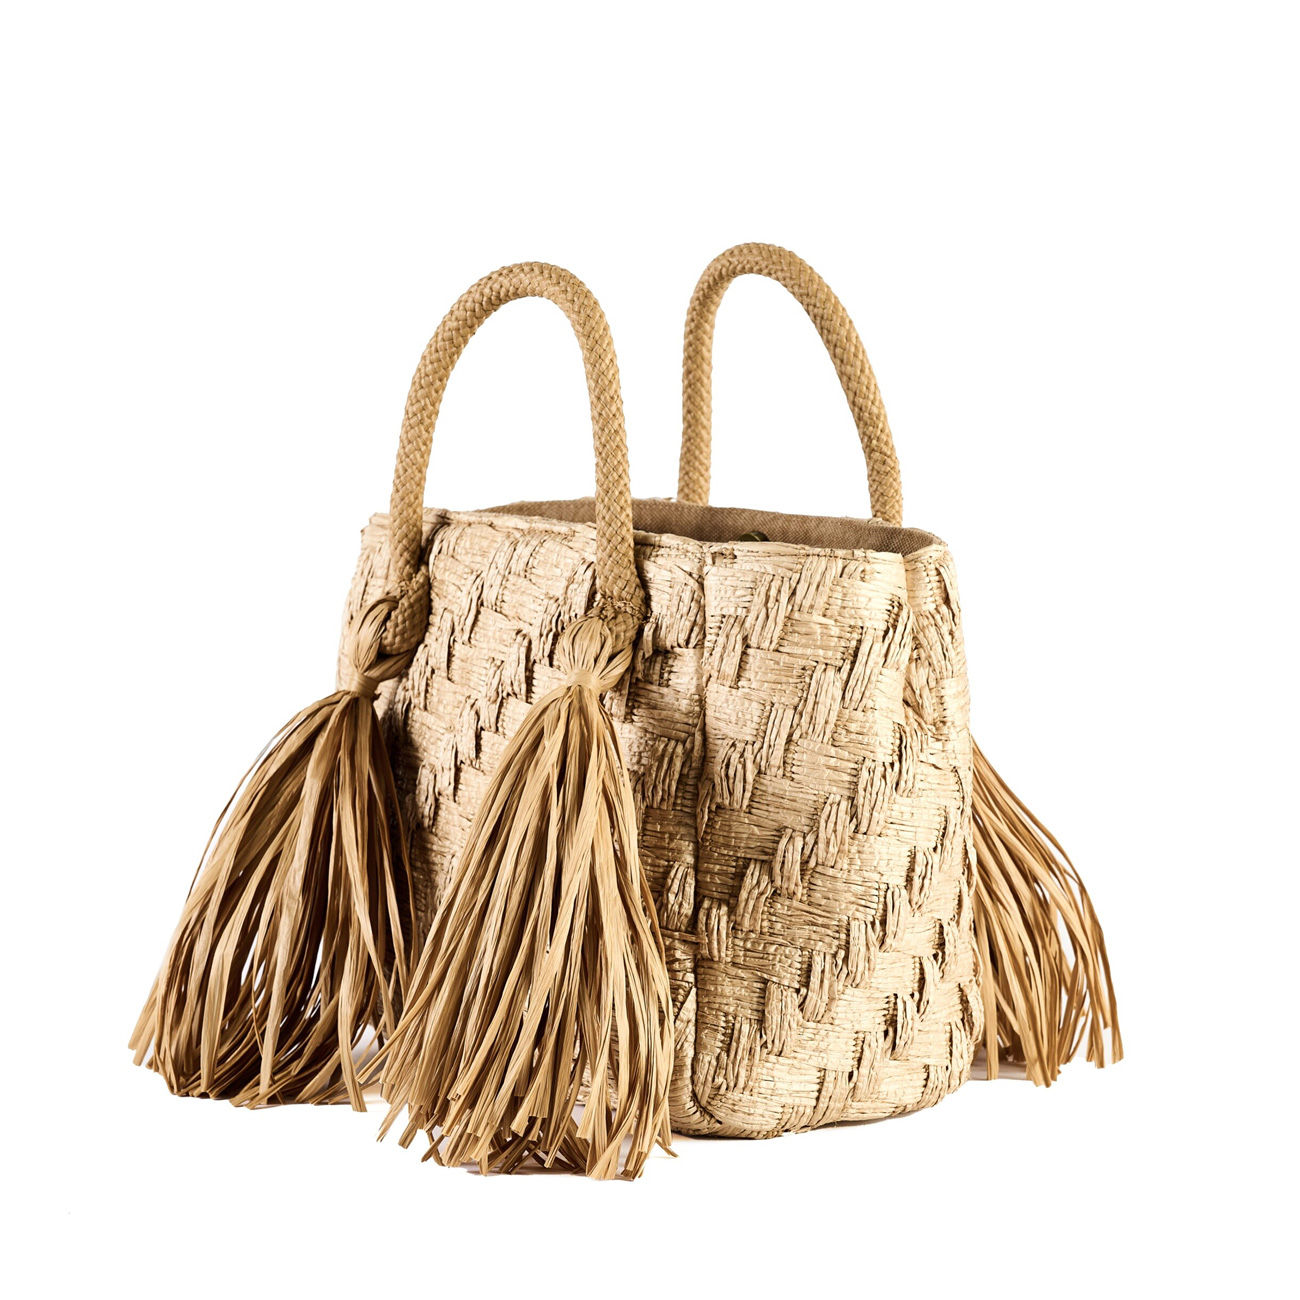 Straw Tote Beach Bag With Tassels